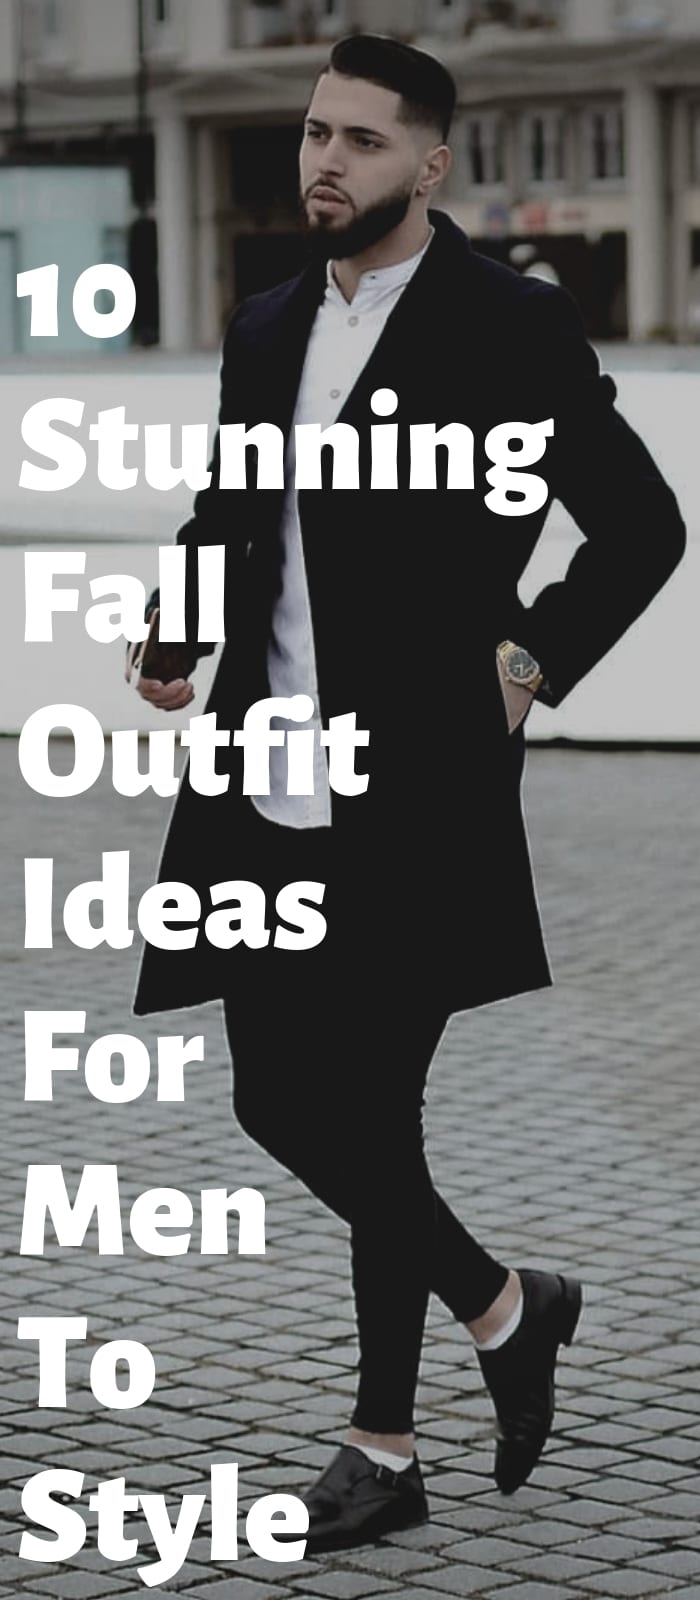 10 Stunning Fall Outfit Ideas For Men To Style!